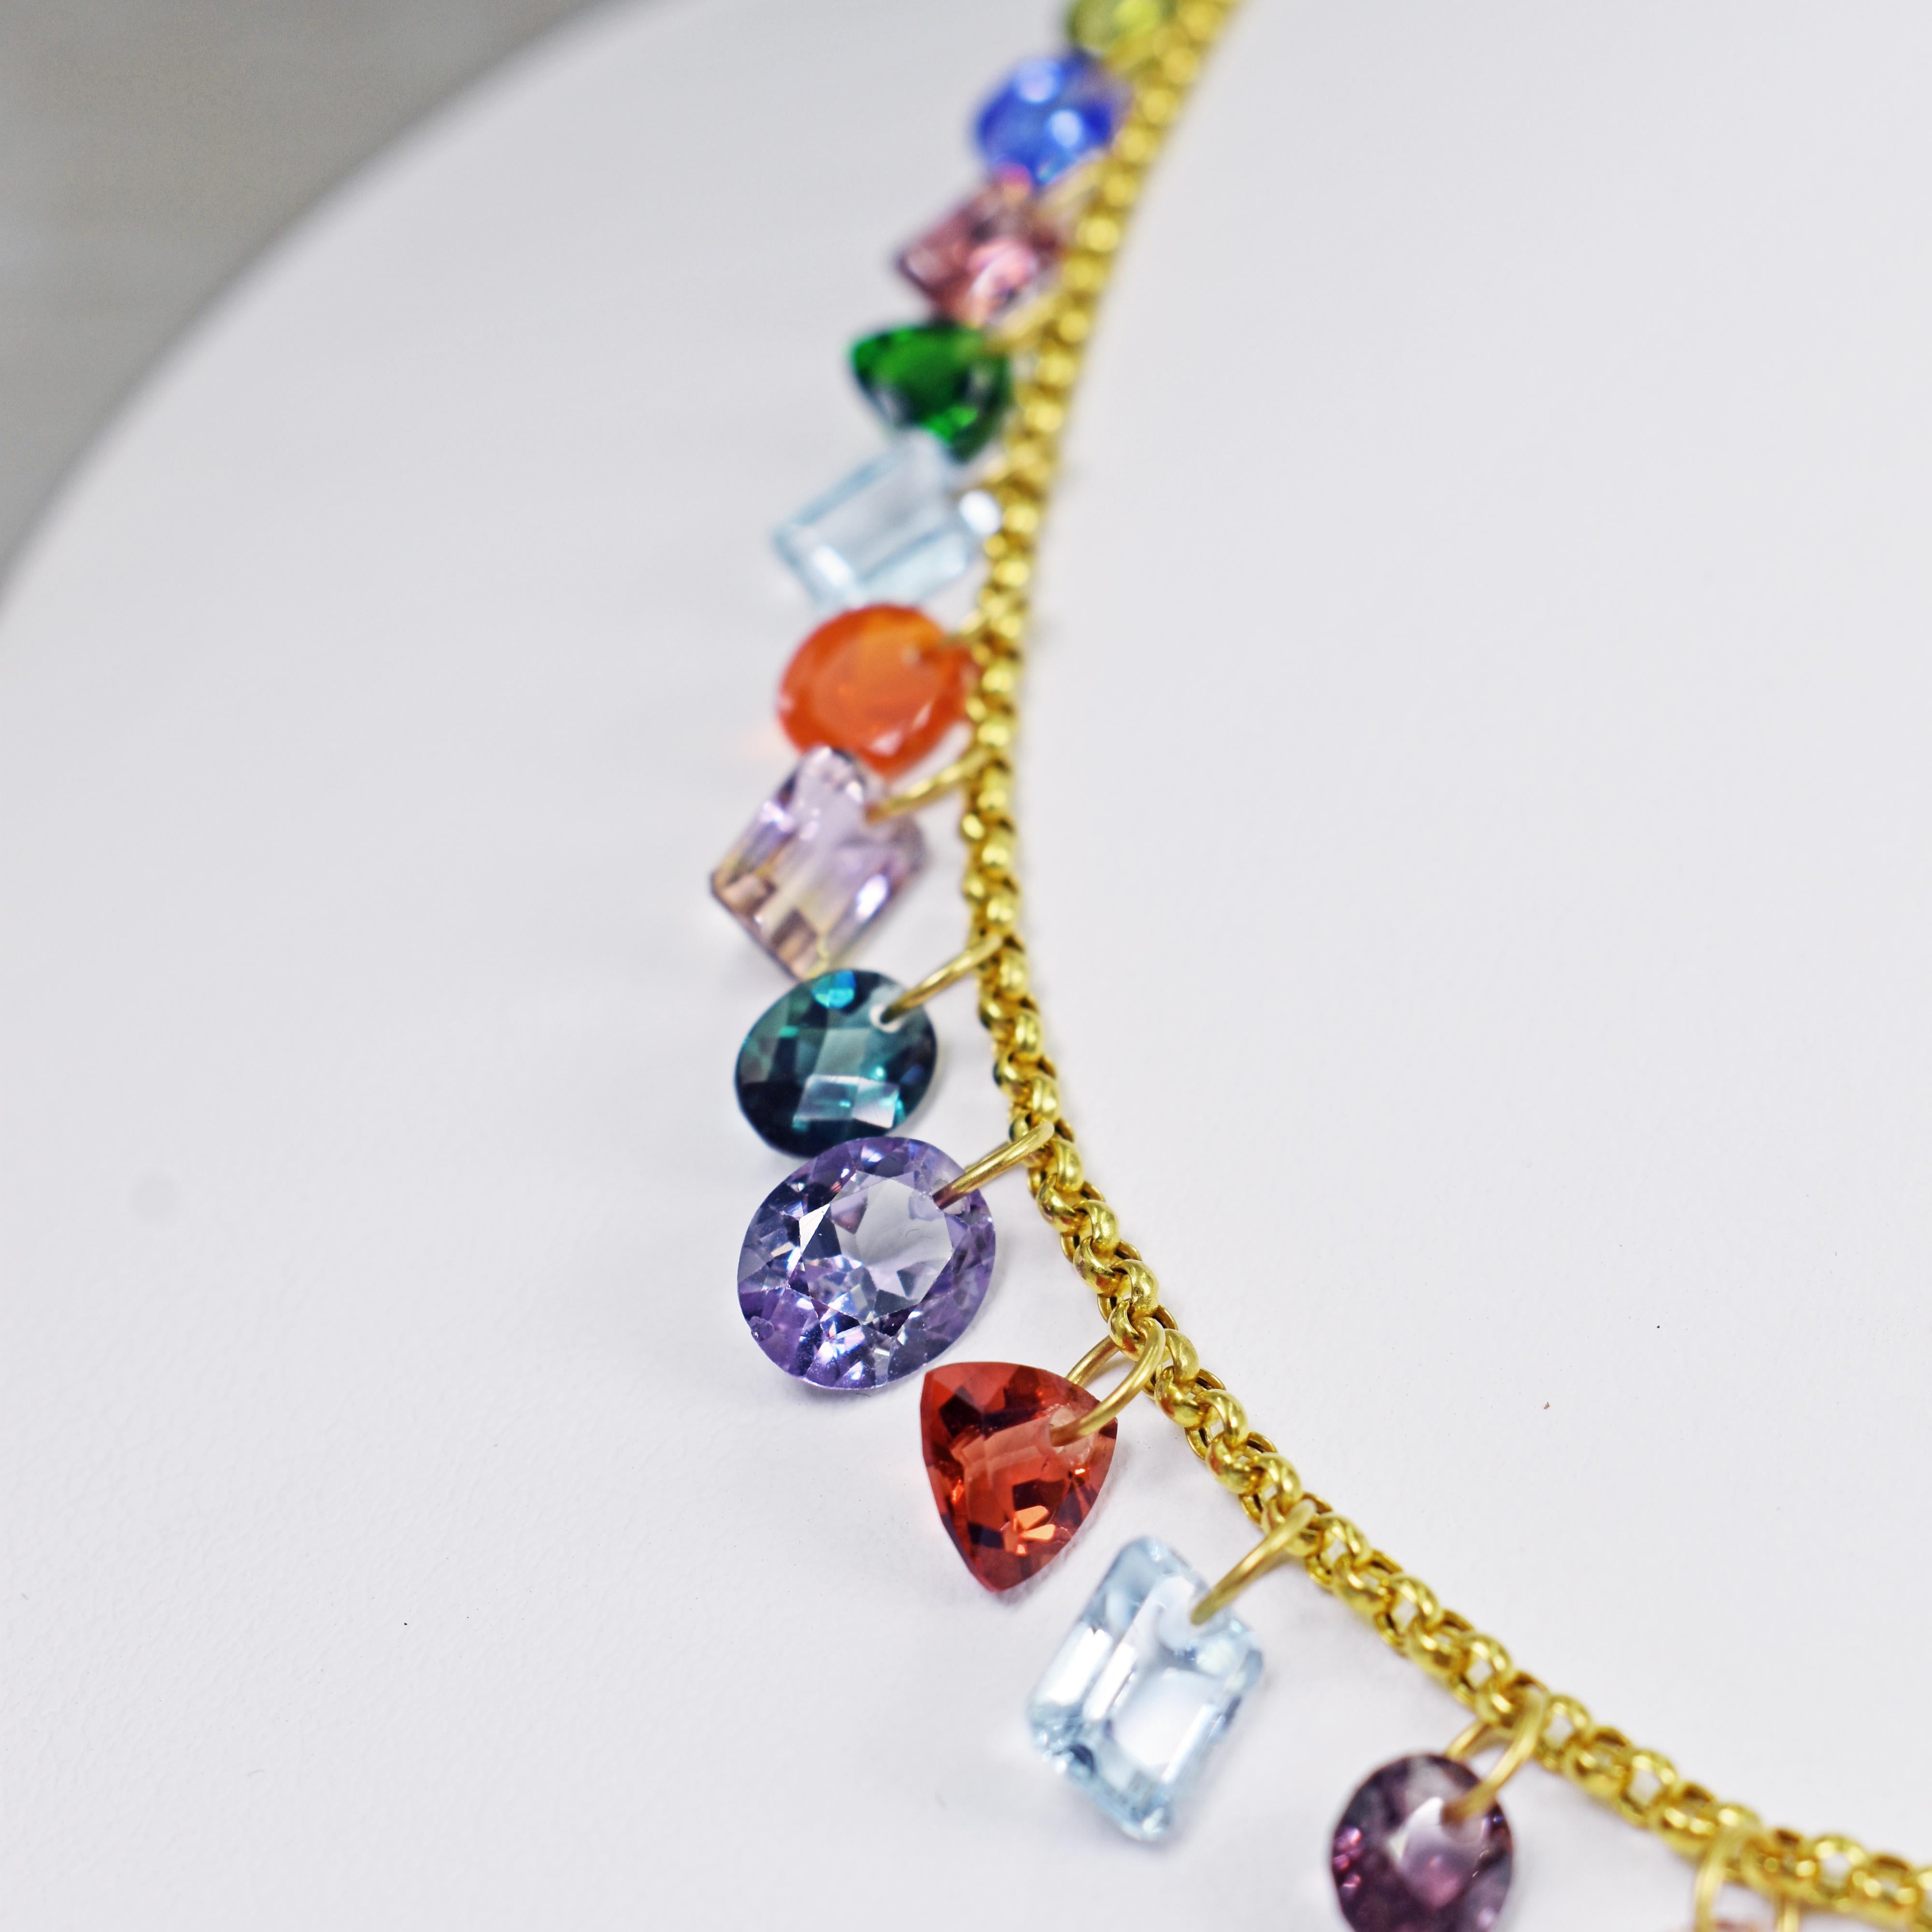 One-of-a-kind, colorful multi-gemstone charms on 22k yellow gold Rolo chain necklace. Gemstones in this necklace include Peridot, Tanzanite, Diopside, Garnet, Aquamarine, Fire Opal, Ametrine, Topaz, Color-Change Lab Sapphire, Morganite, Citrine,